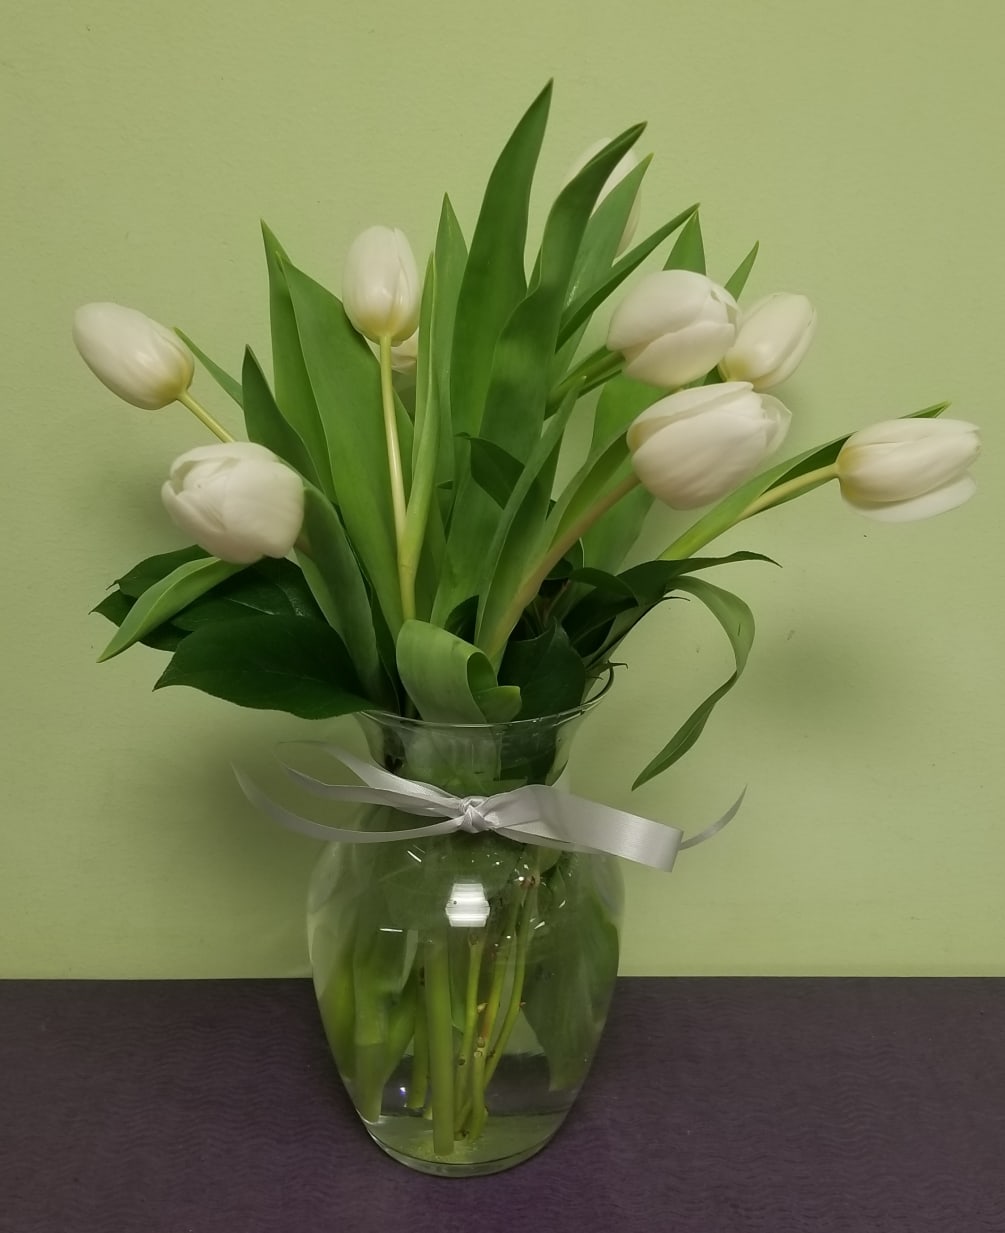 10 beautiful white Tulips arranged in a glass vase!